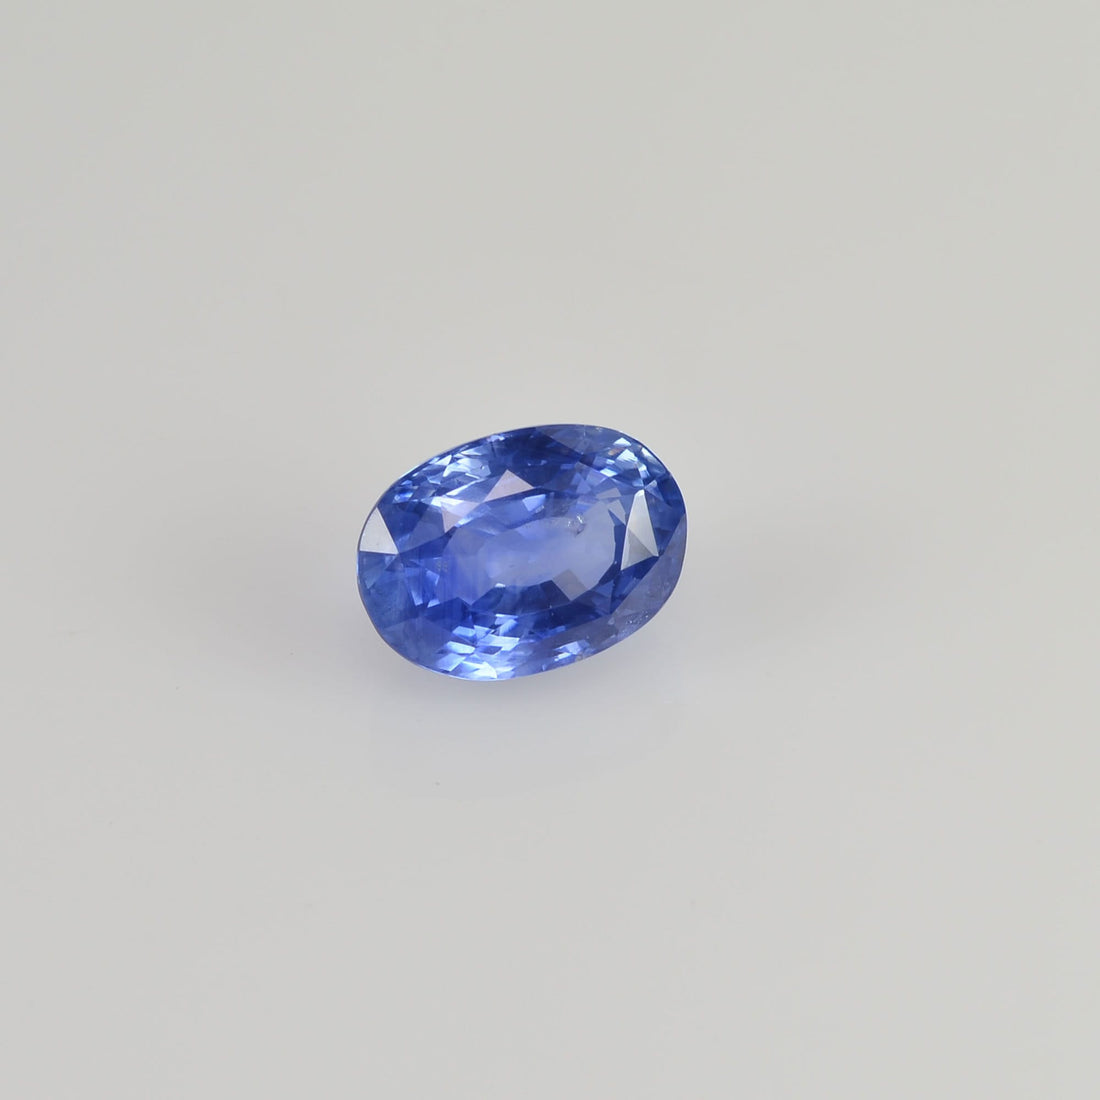 2.17 cts Unheated Natural Blue Sapphire Loose Gemstone Oval Cut Certified